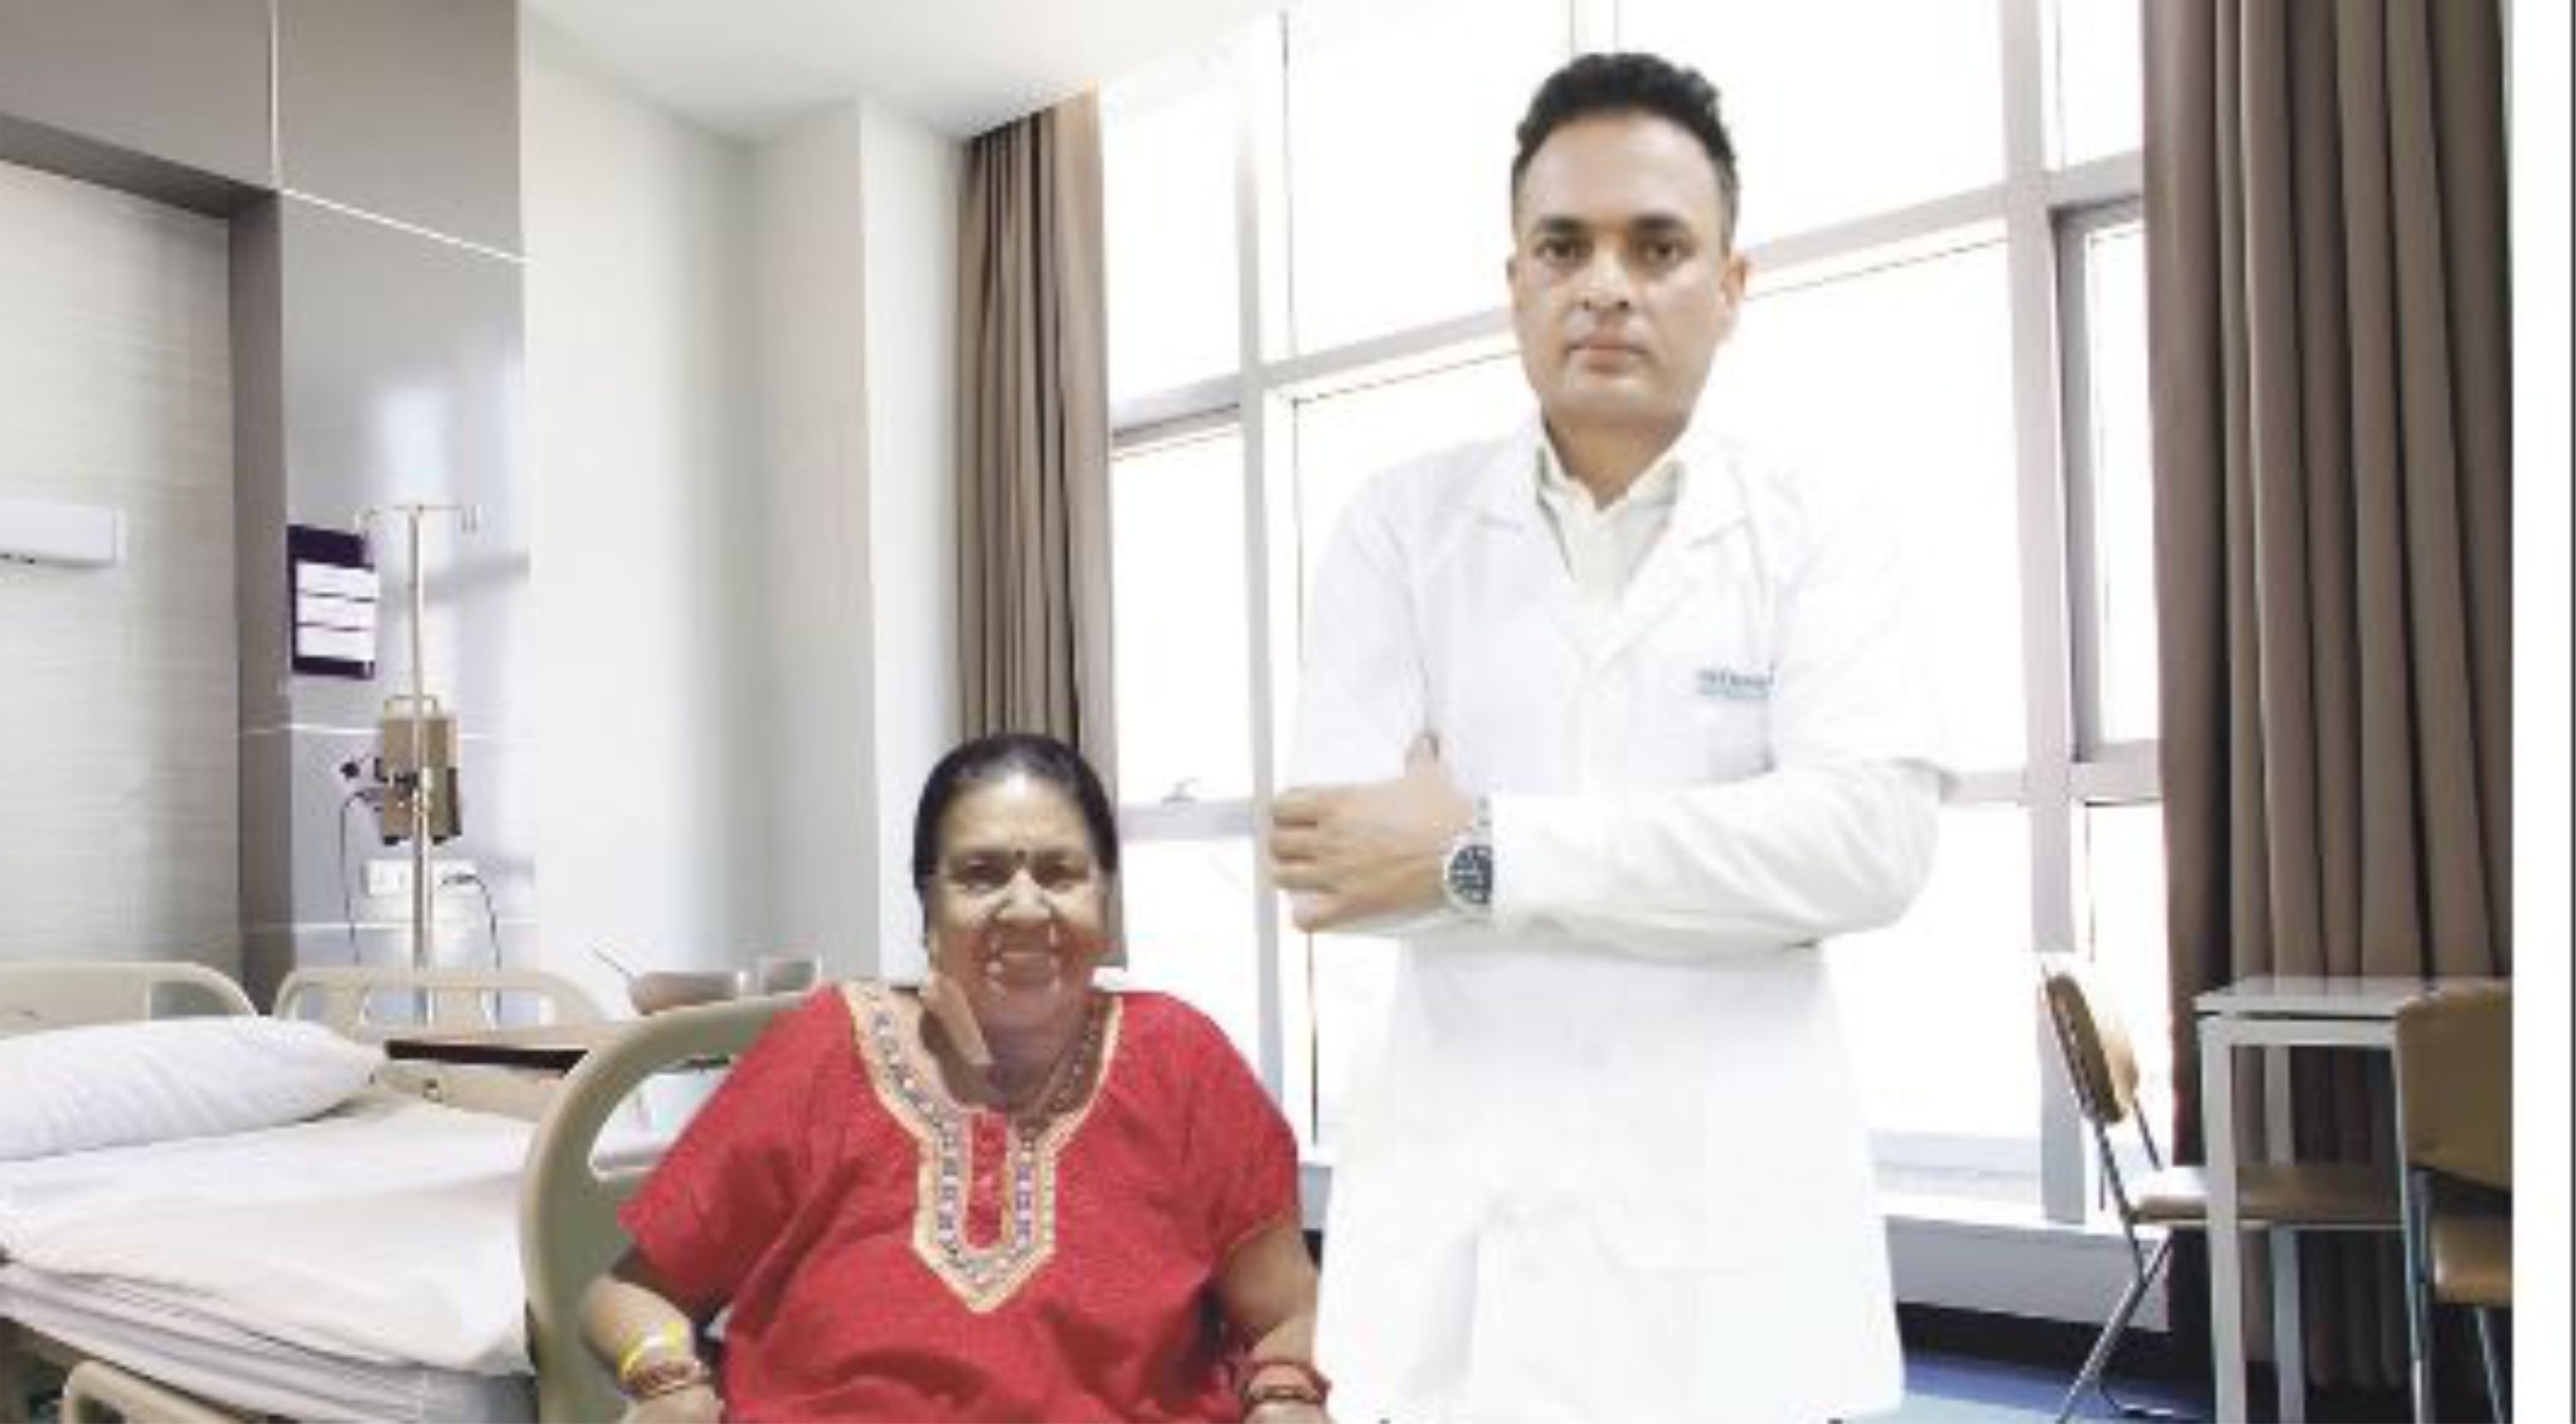 Doctors gave new lease of life to kidney failure patient